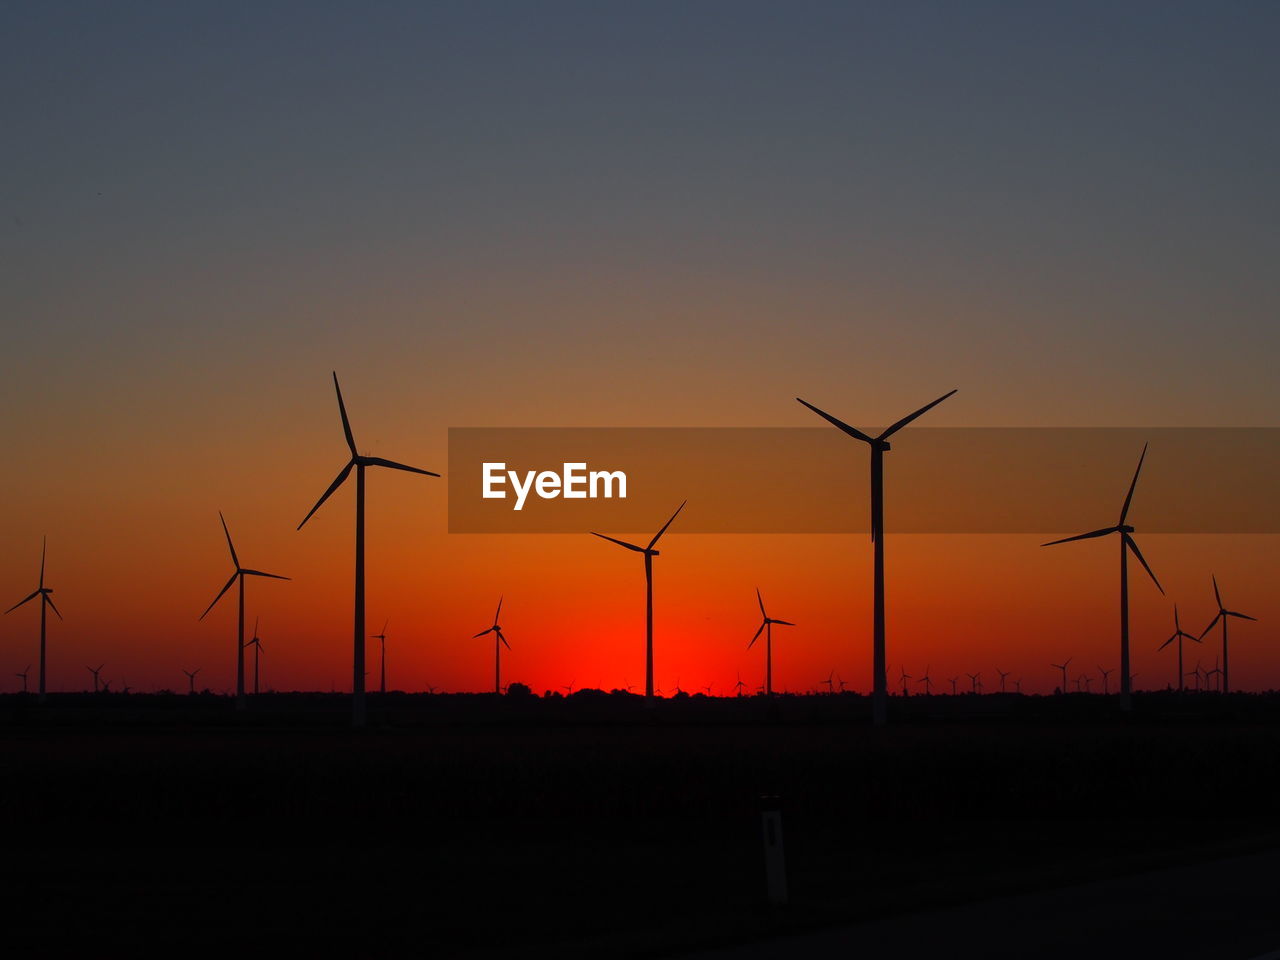 Silhouette wind turbine against sky during sunset